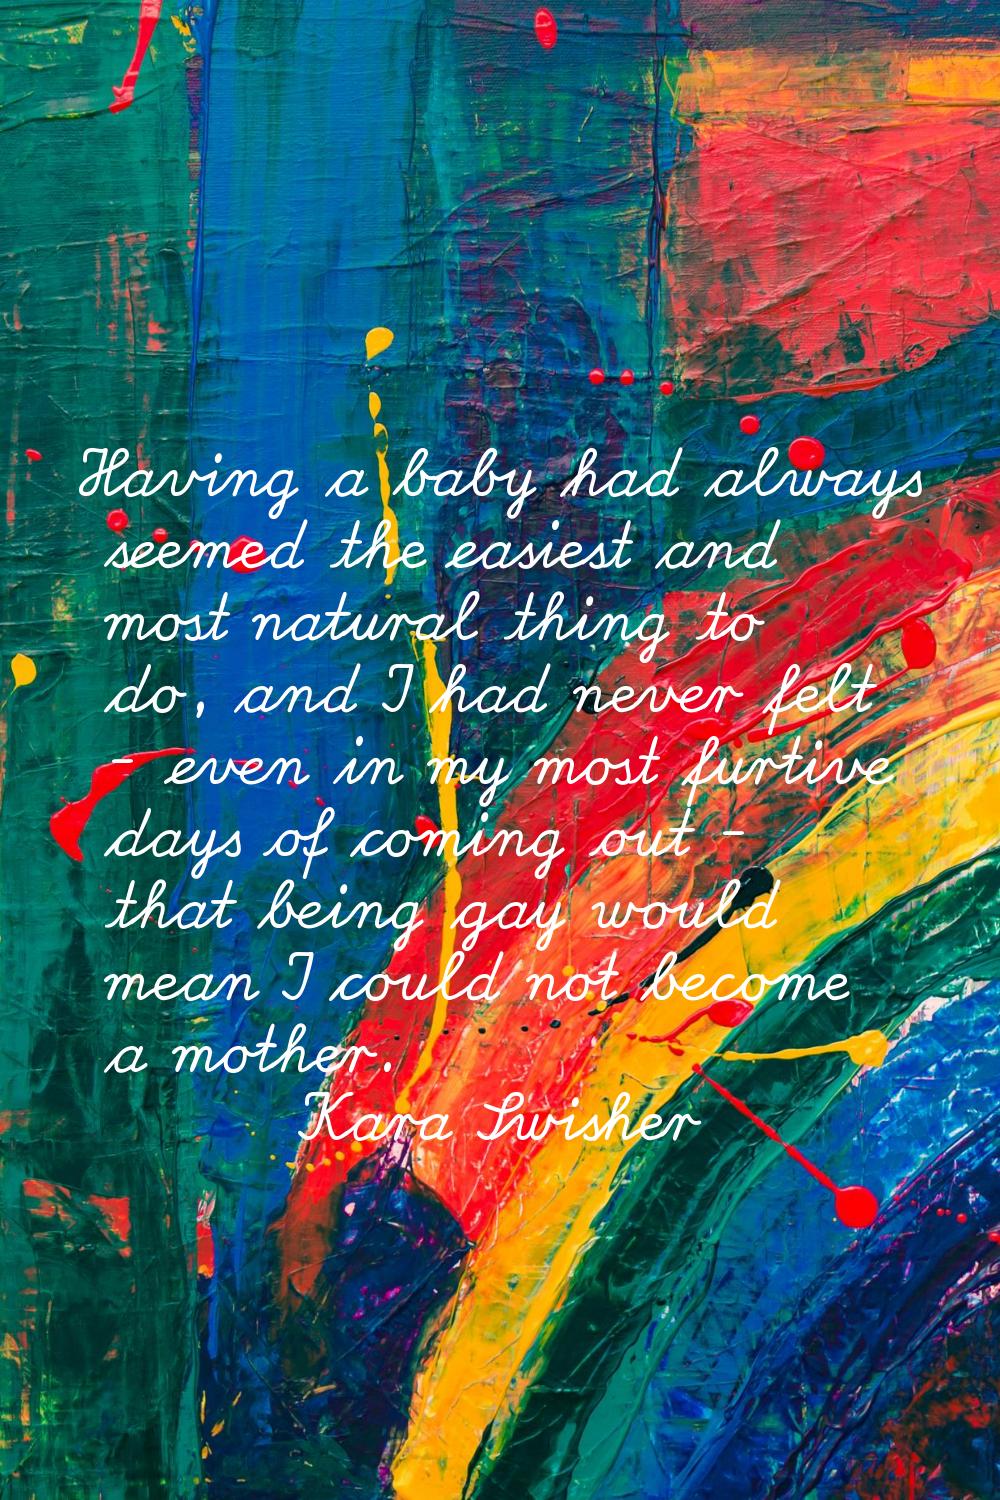 Having a baby had always seemed the easiest and most natural thing to do, and I had never felt - ev